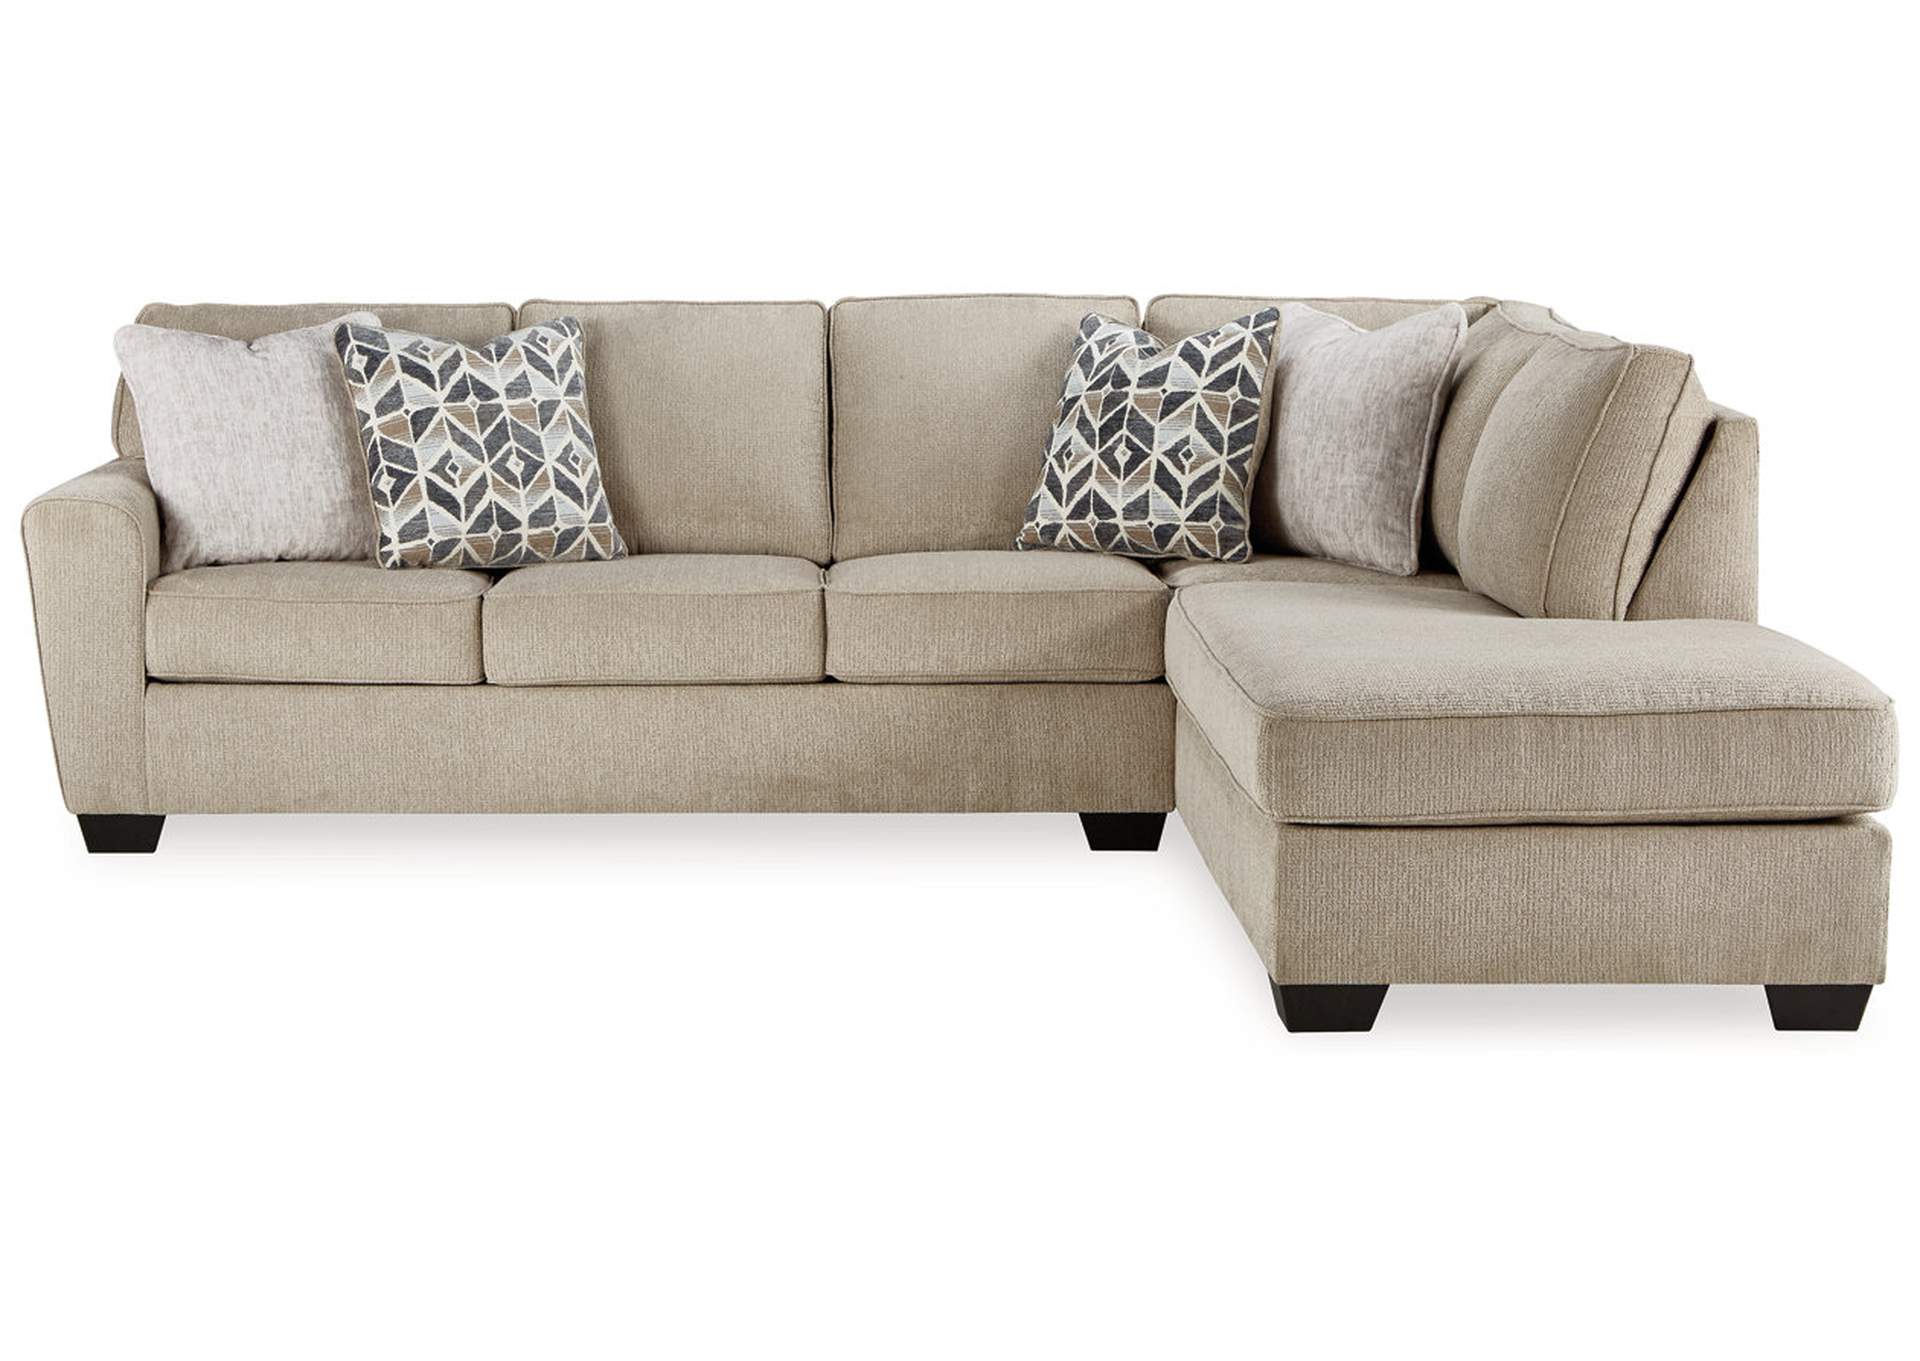 Decelle 2-Piece Sectional with Chaise,Signature Design By Ashley